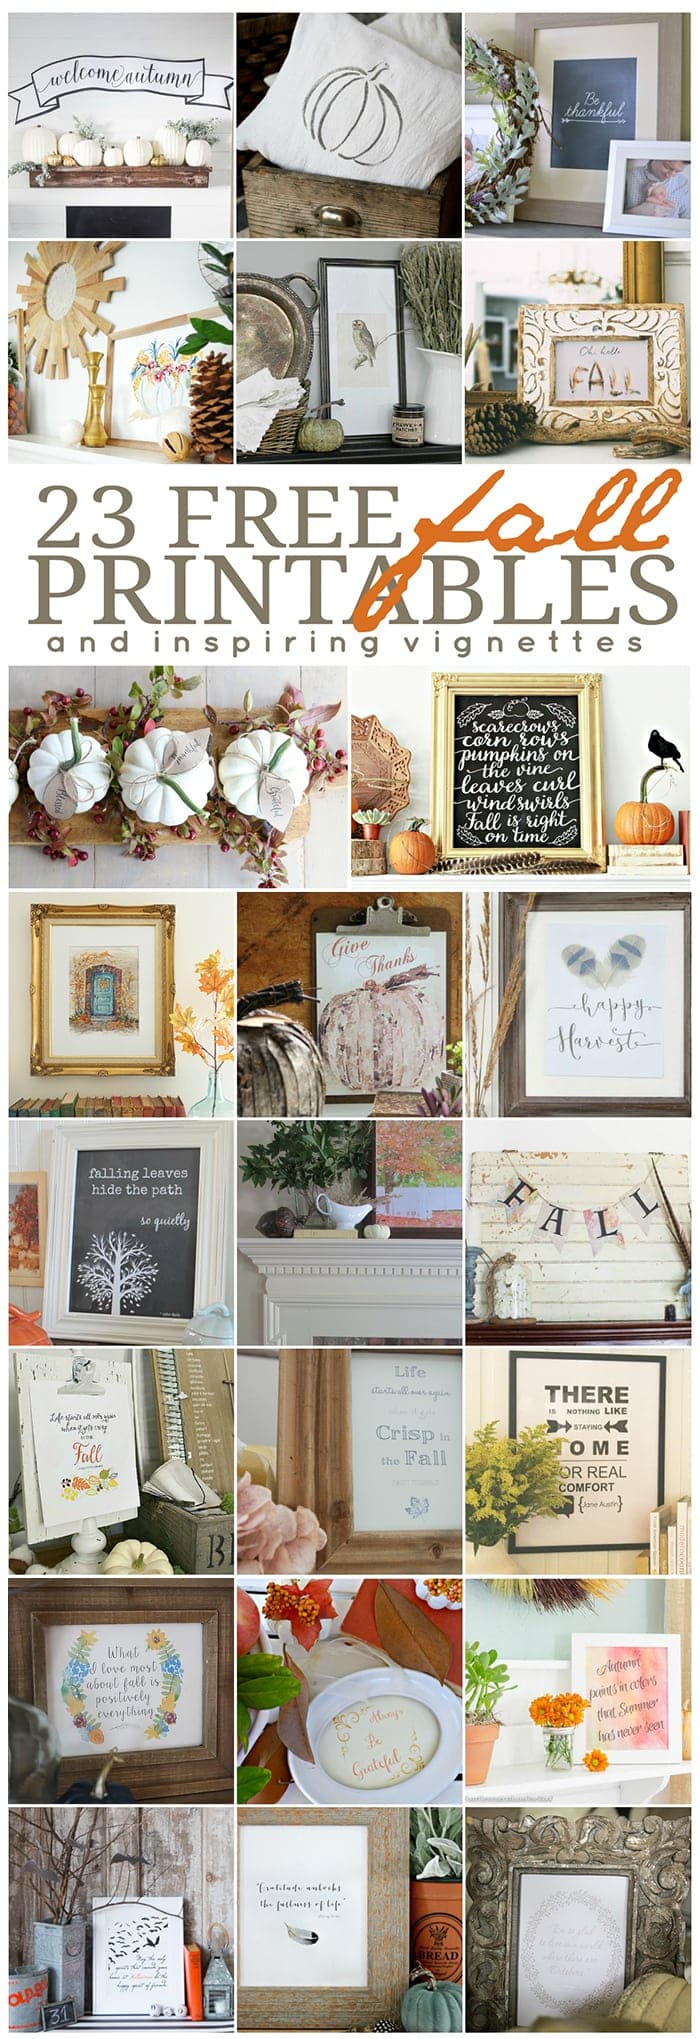 23 Fall Printables and inspiring Fall vignettes for your home.